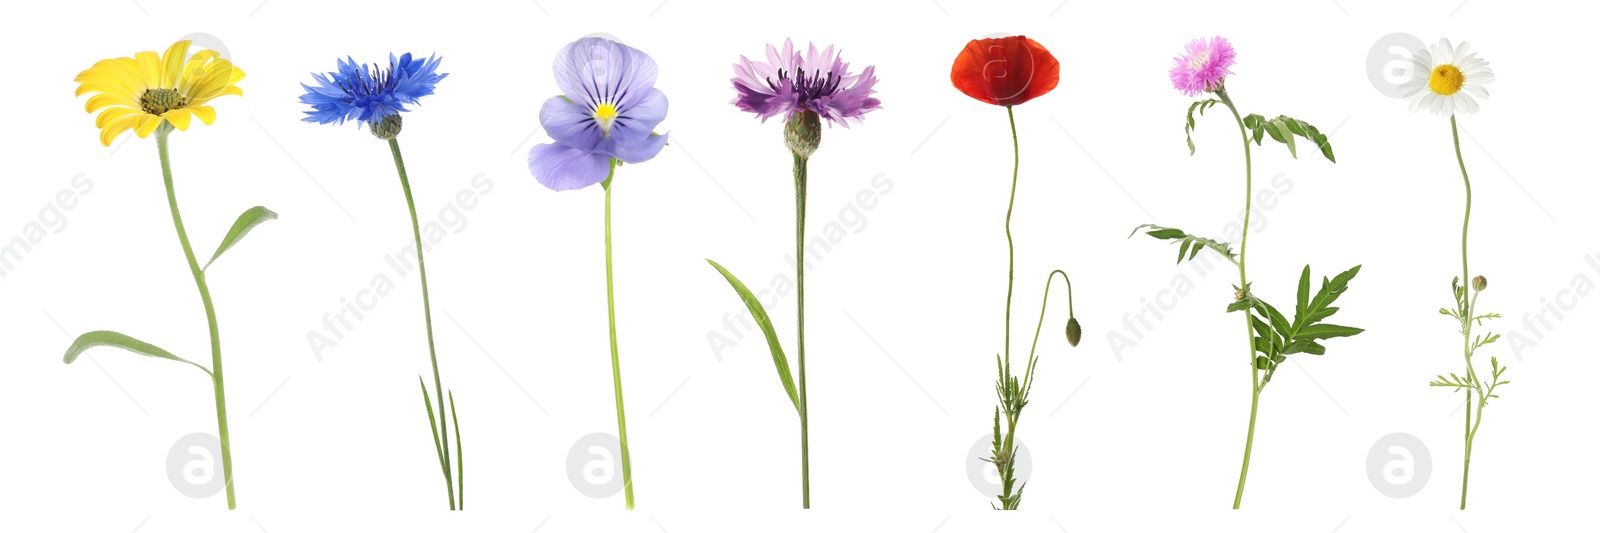 Image of Collection of different beautiful wild flowers on white background. Banner design